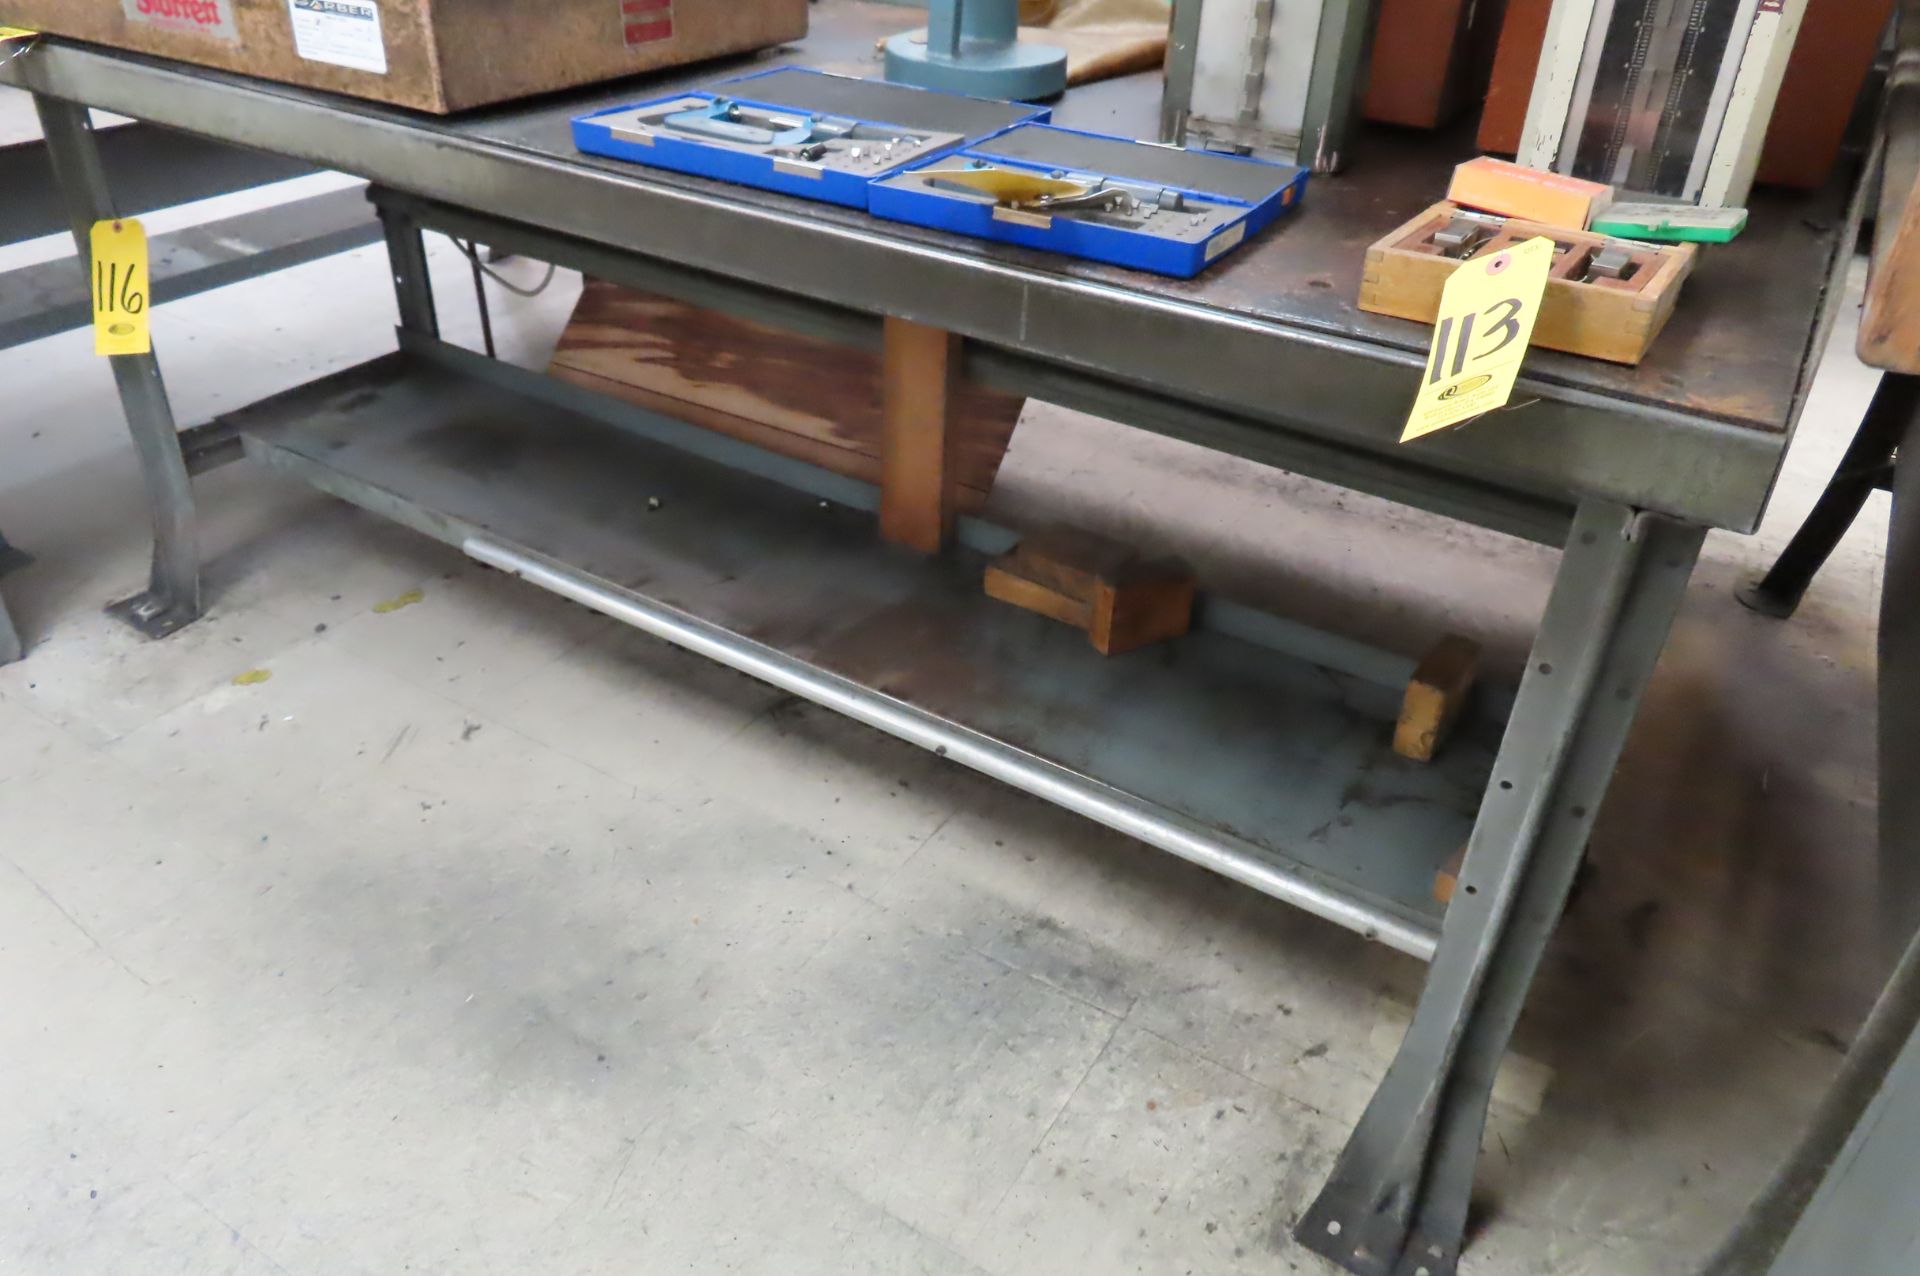 72 X 30 IN. METAL SHOP TABLE WITH UNDERSHELF AND LIGHT - Image 2 of 3